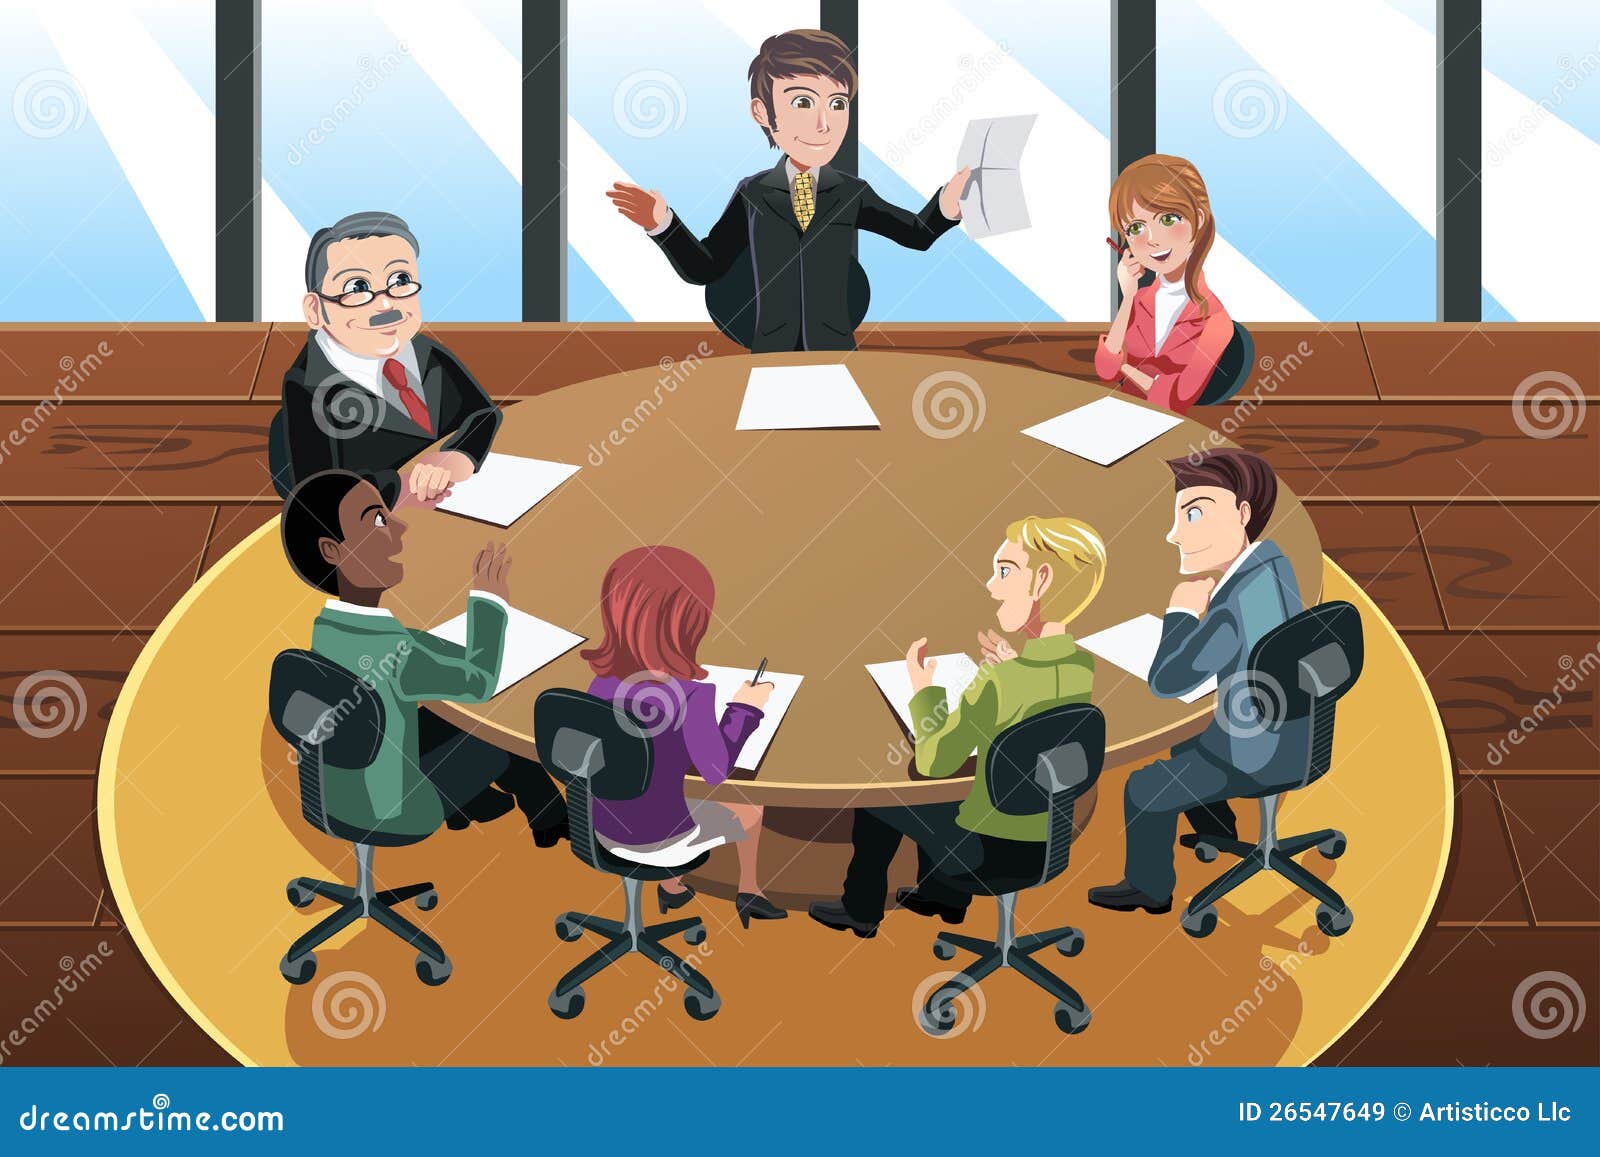 business meeting clipart - photo #26